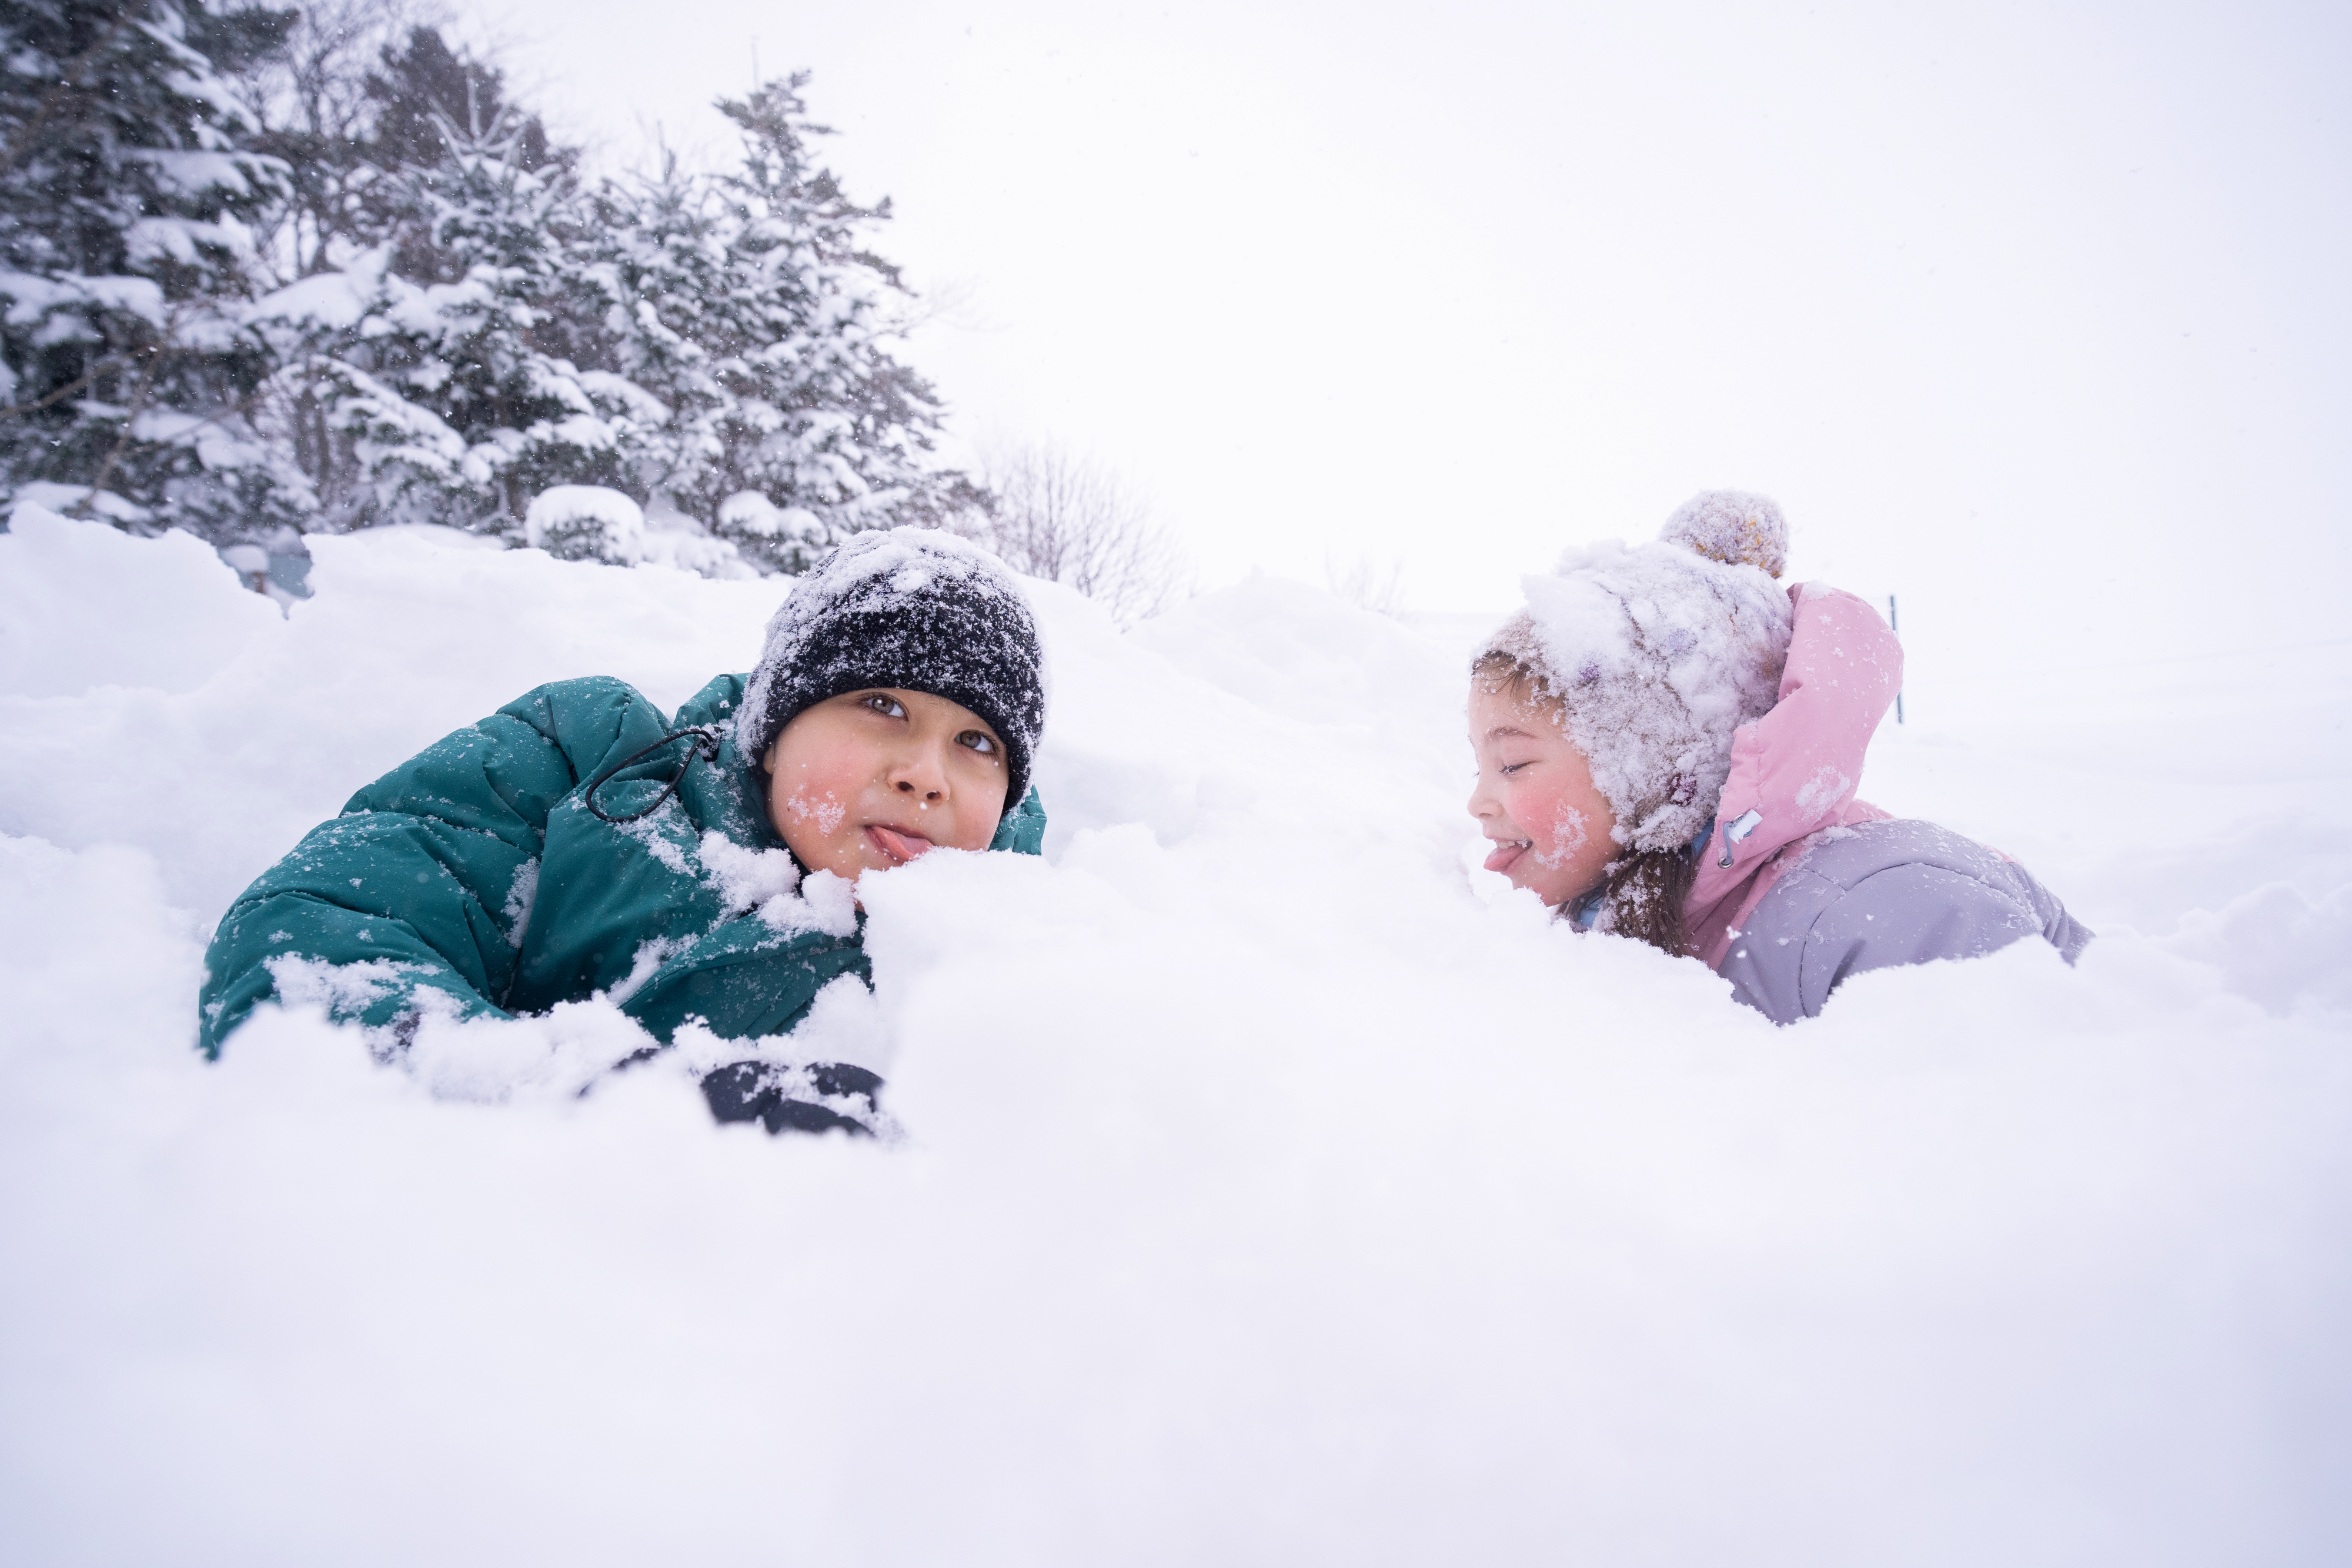 Two children bundled in winter coats and hats and playing in the snow